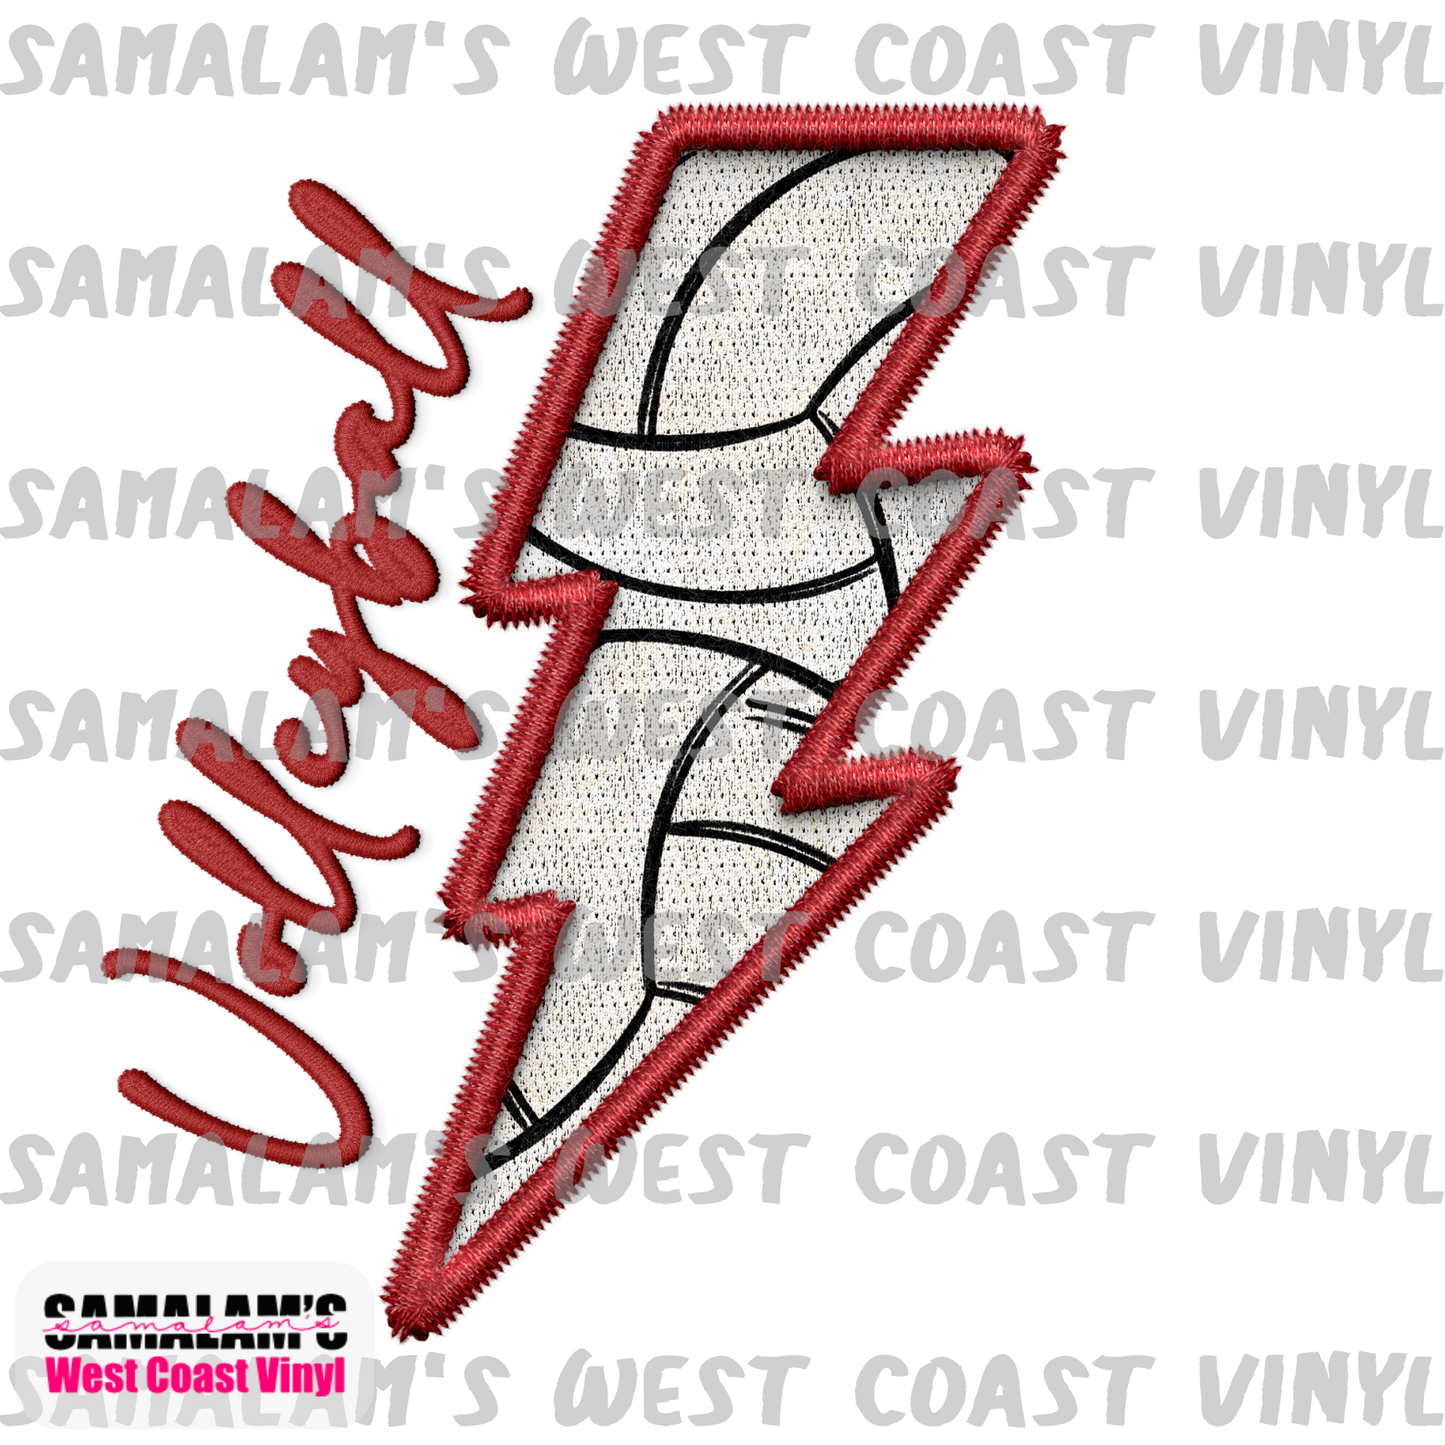 Embroidery - Lightning Bolt - Volleyball 2 - Clear Cast Decal